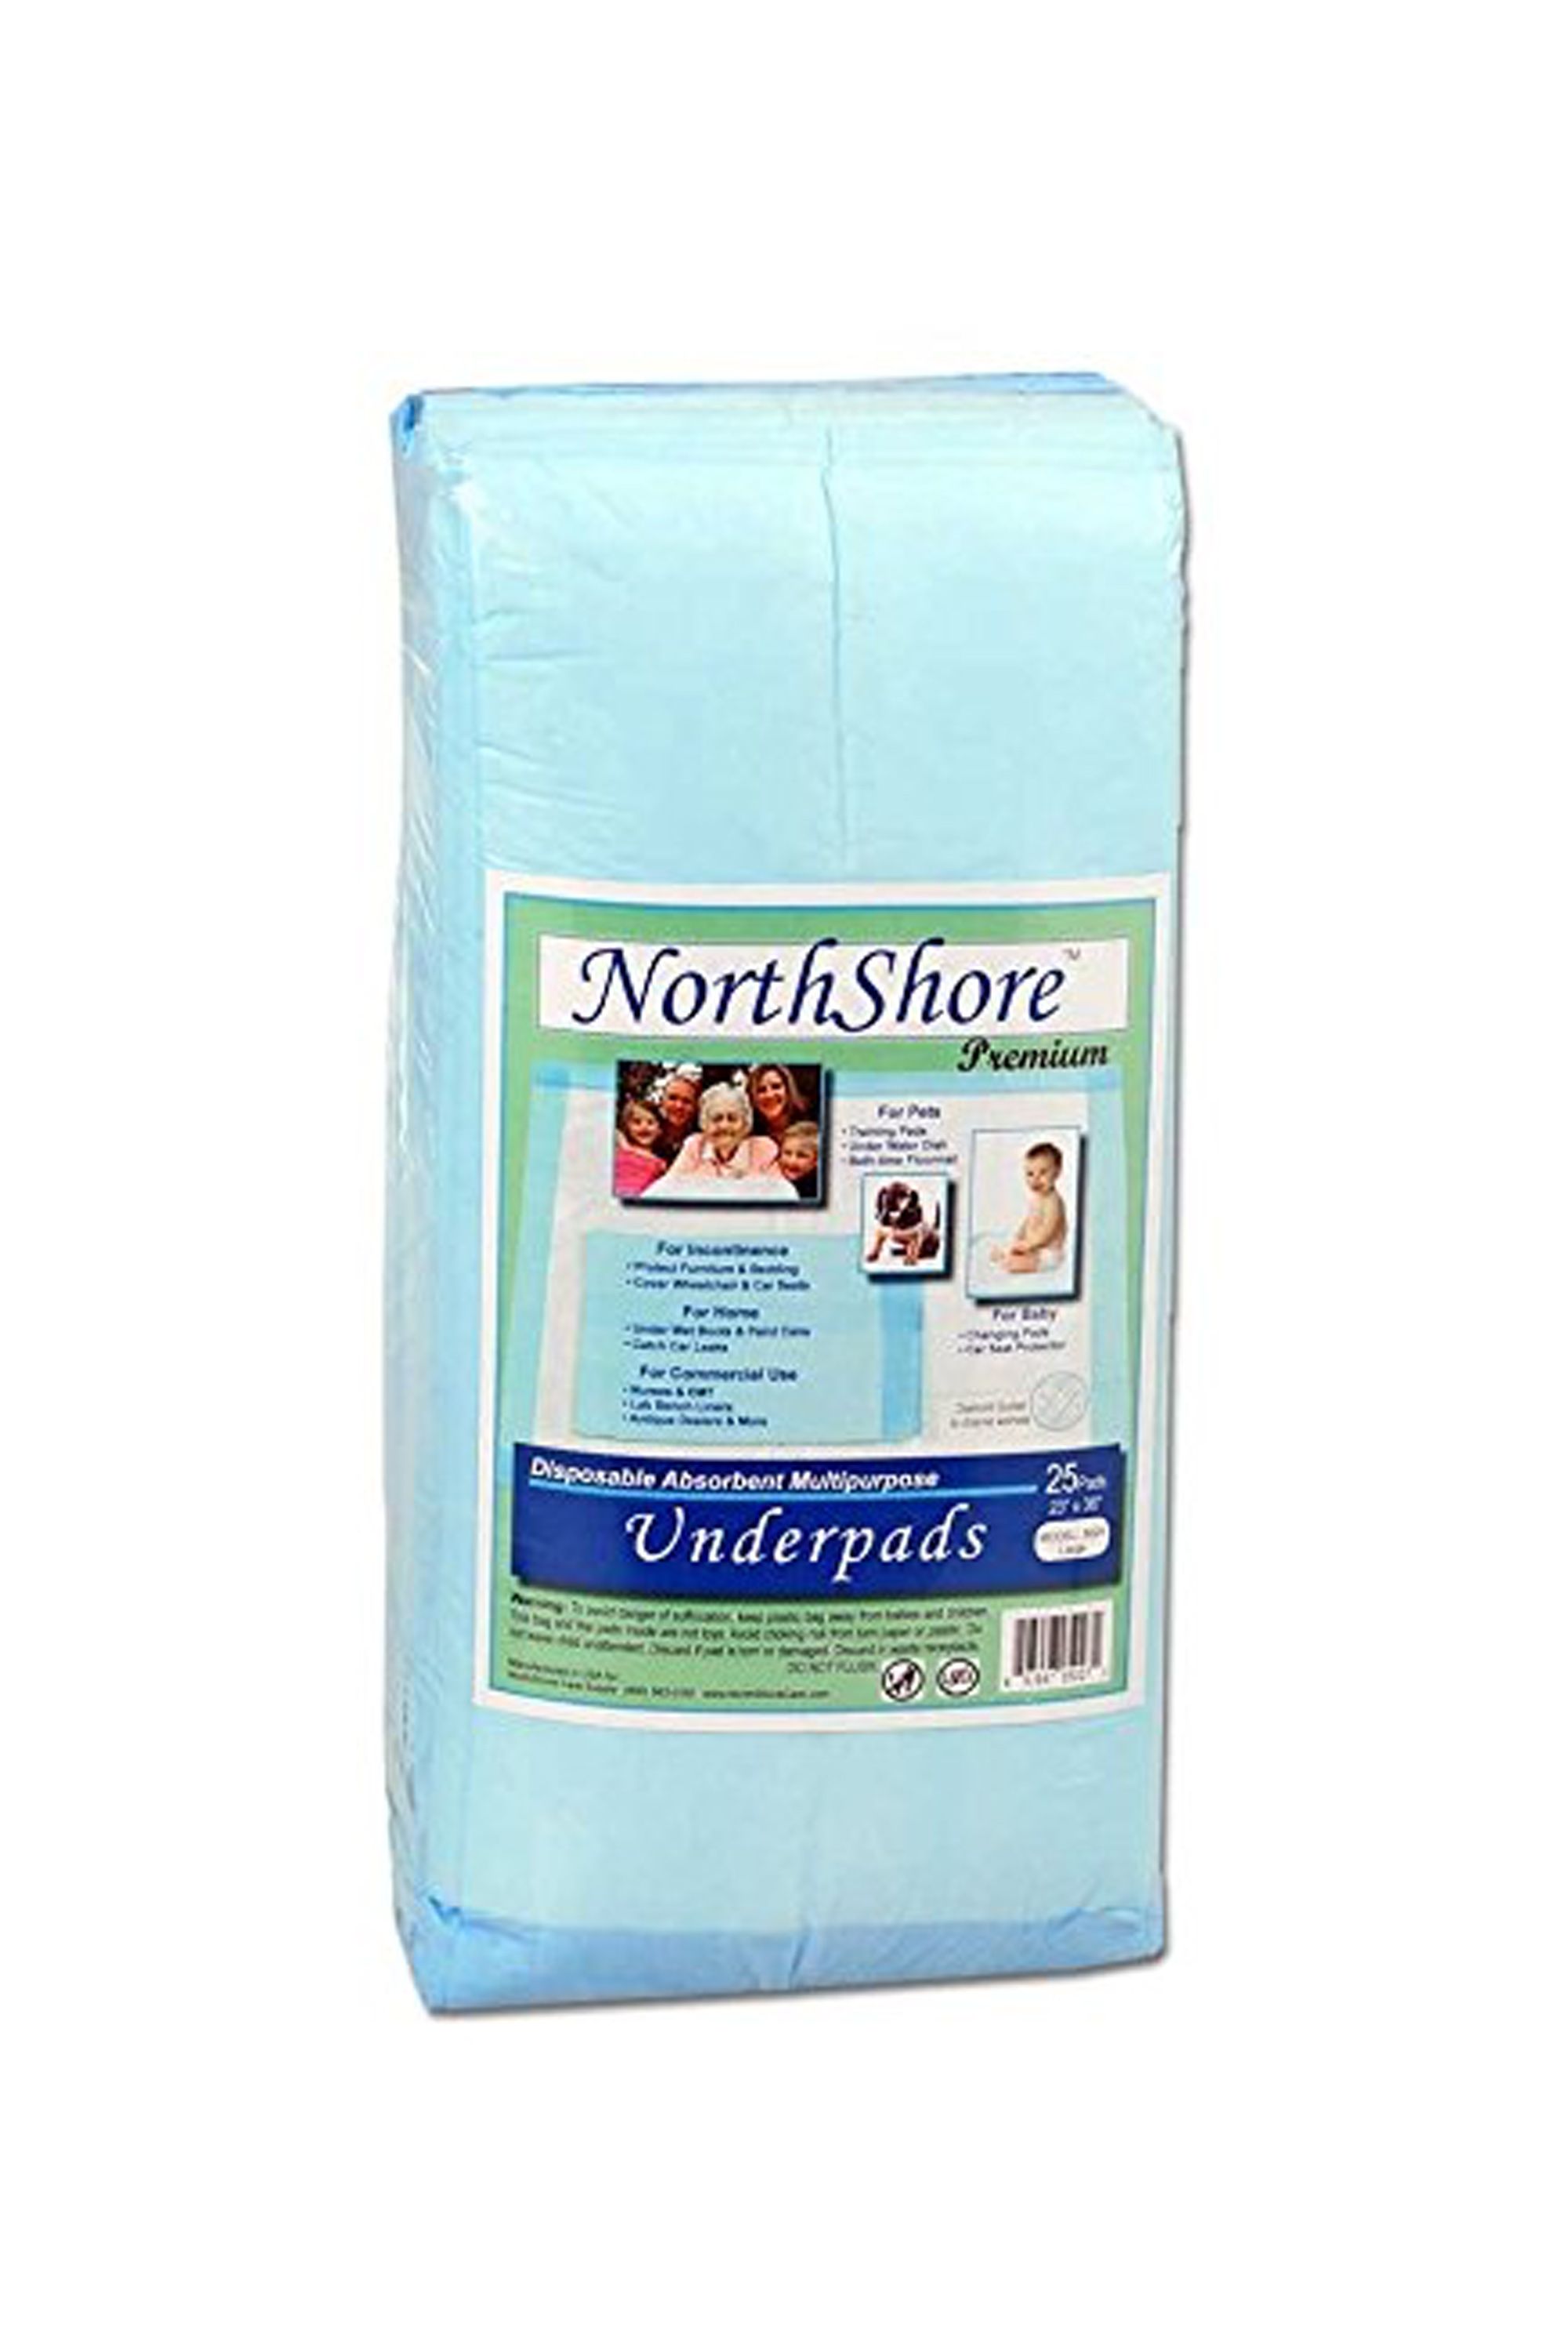 NorthShore Premium Extra-Absorbent Disposable Chux Underpads